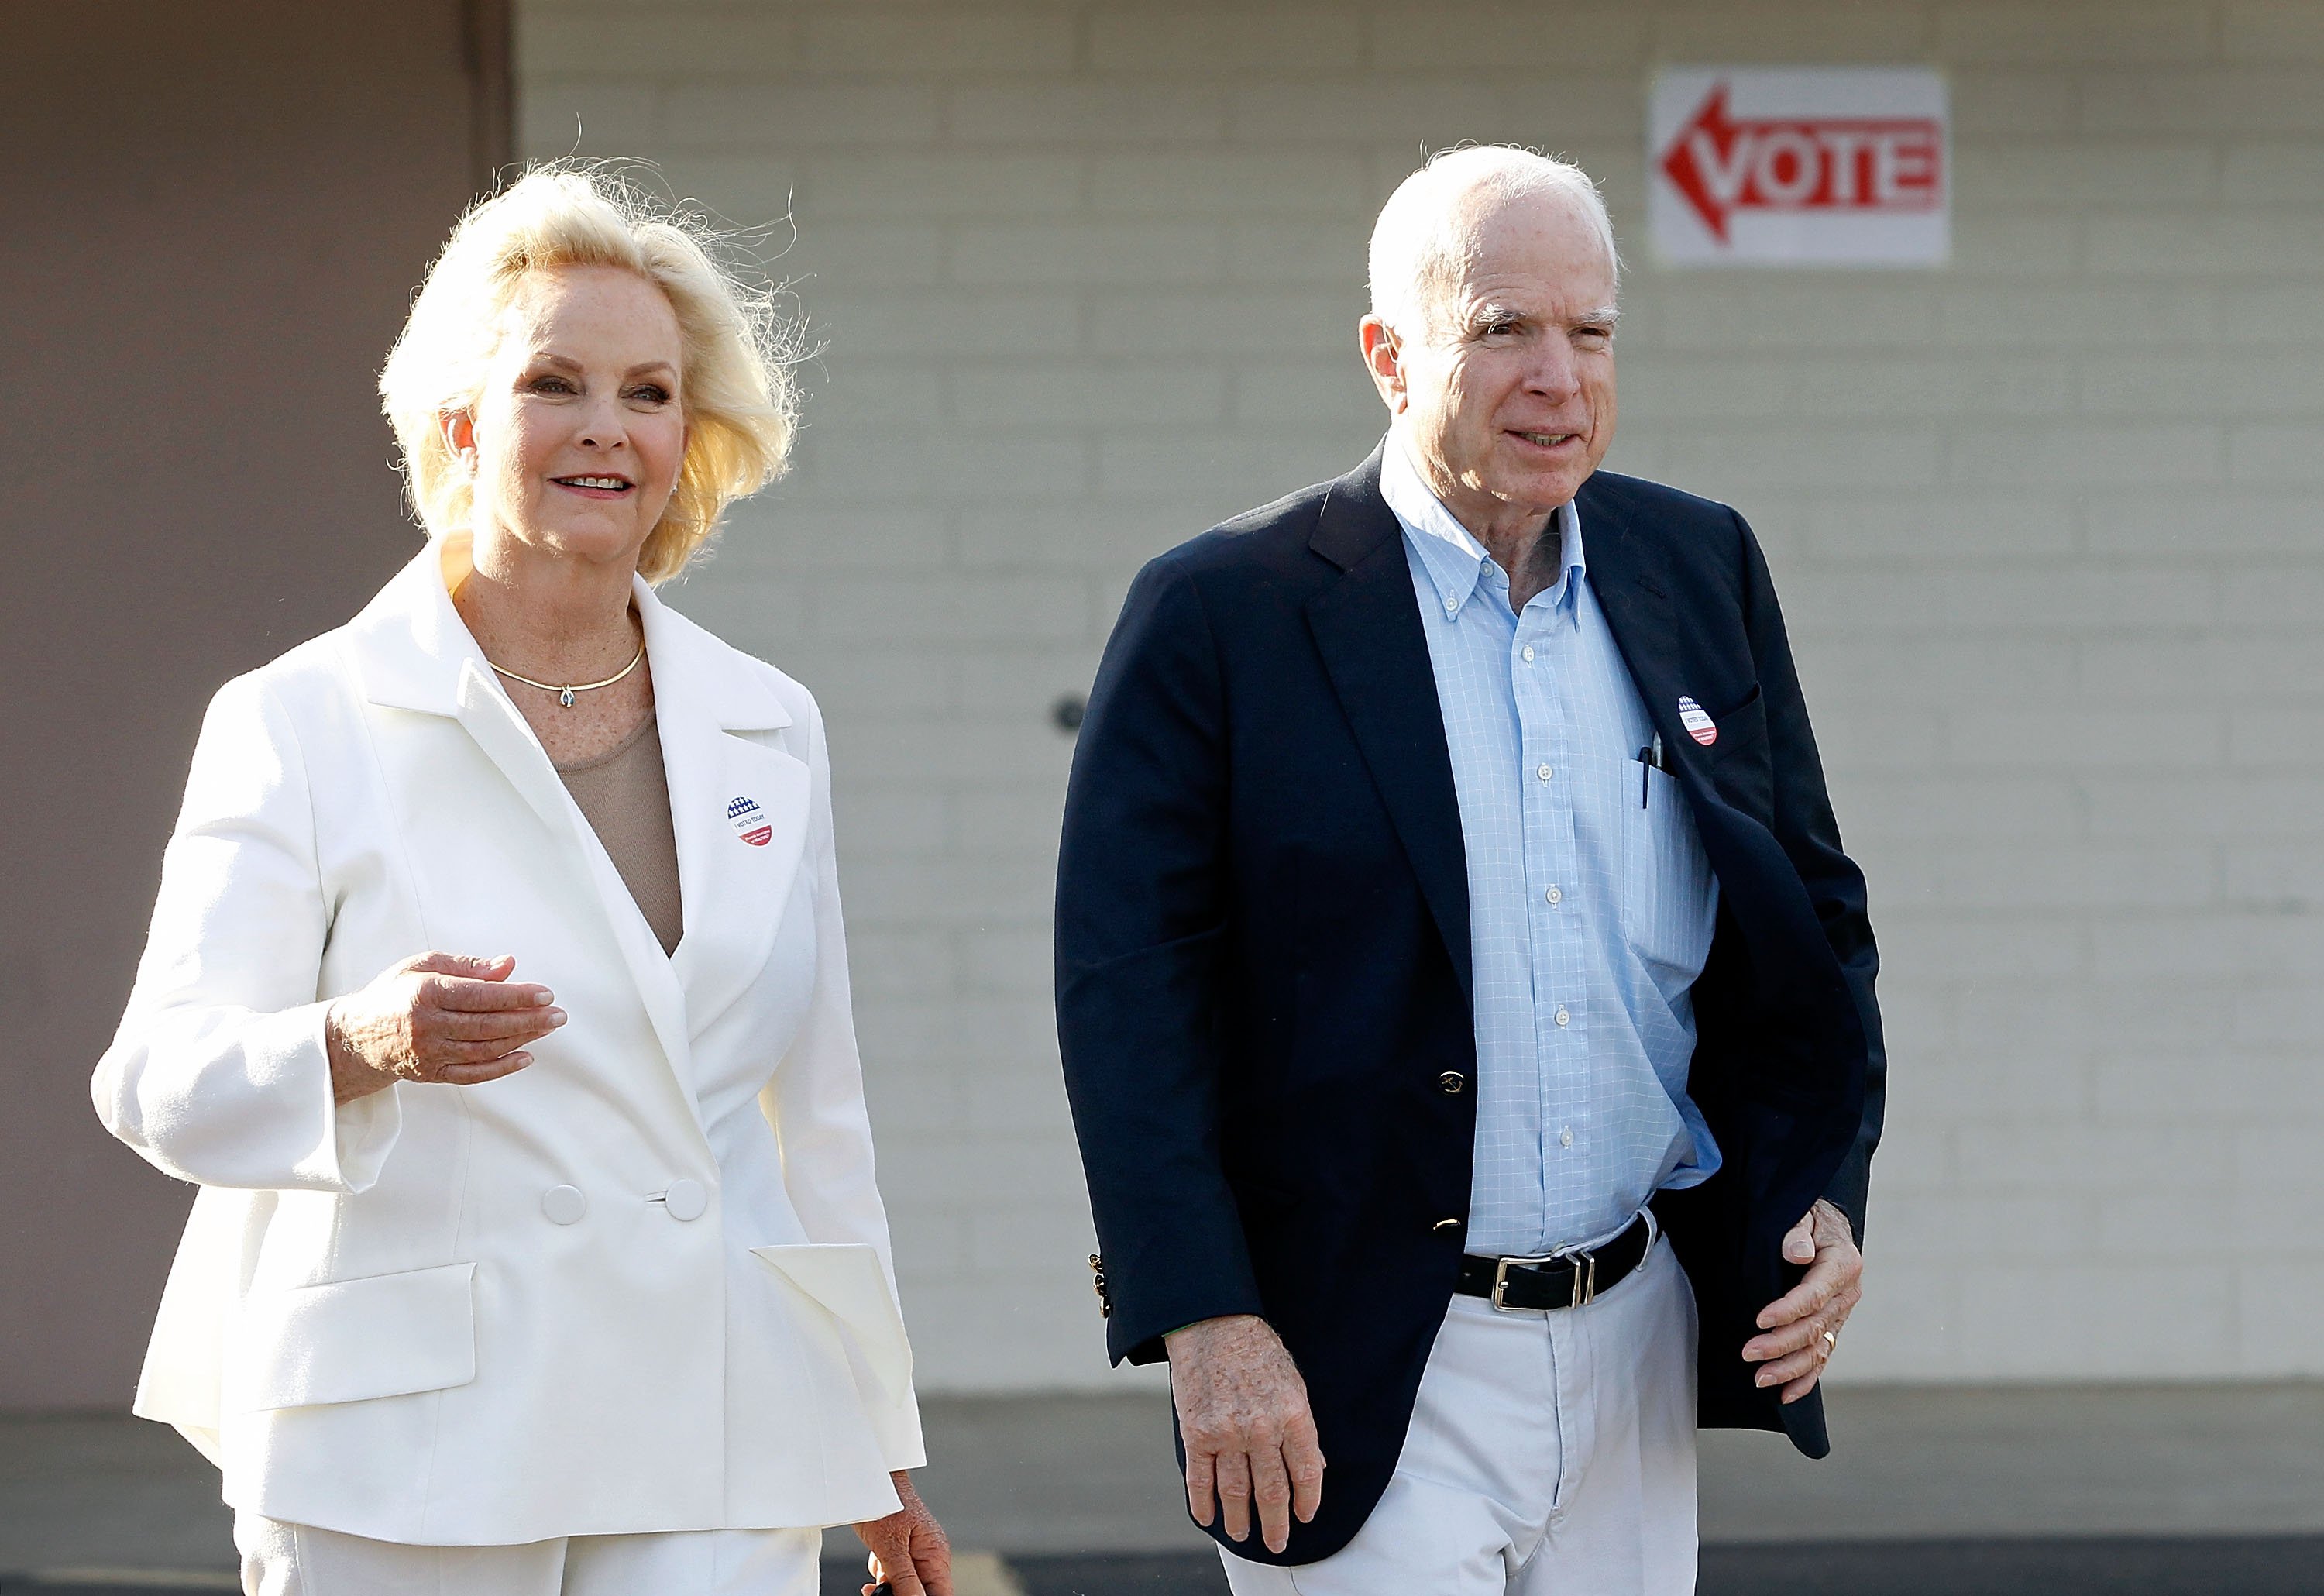 John and Cindy McCain leaving the Mountain View Christian Church polling place after casting their vote on November 8, 2016 in Phoenix, Arizona | Photo: Getty Images